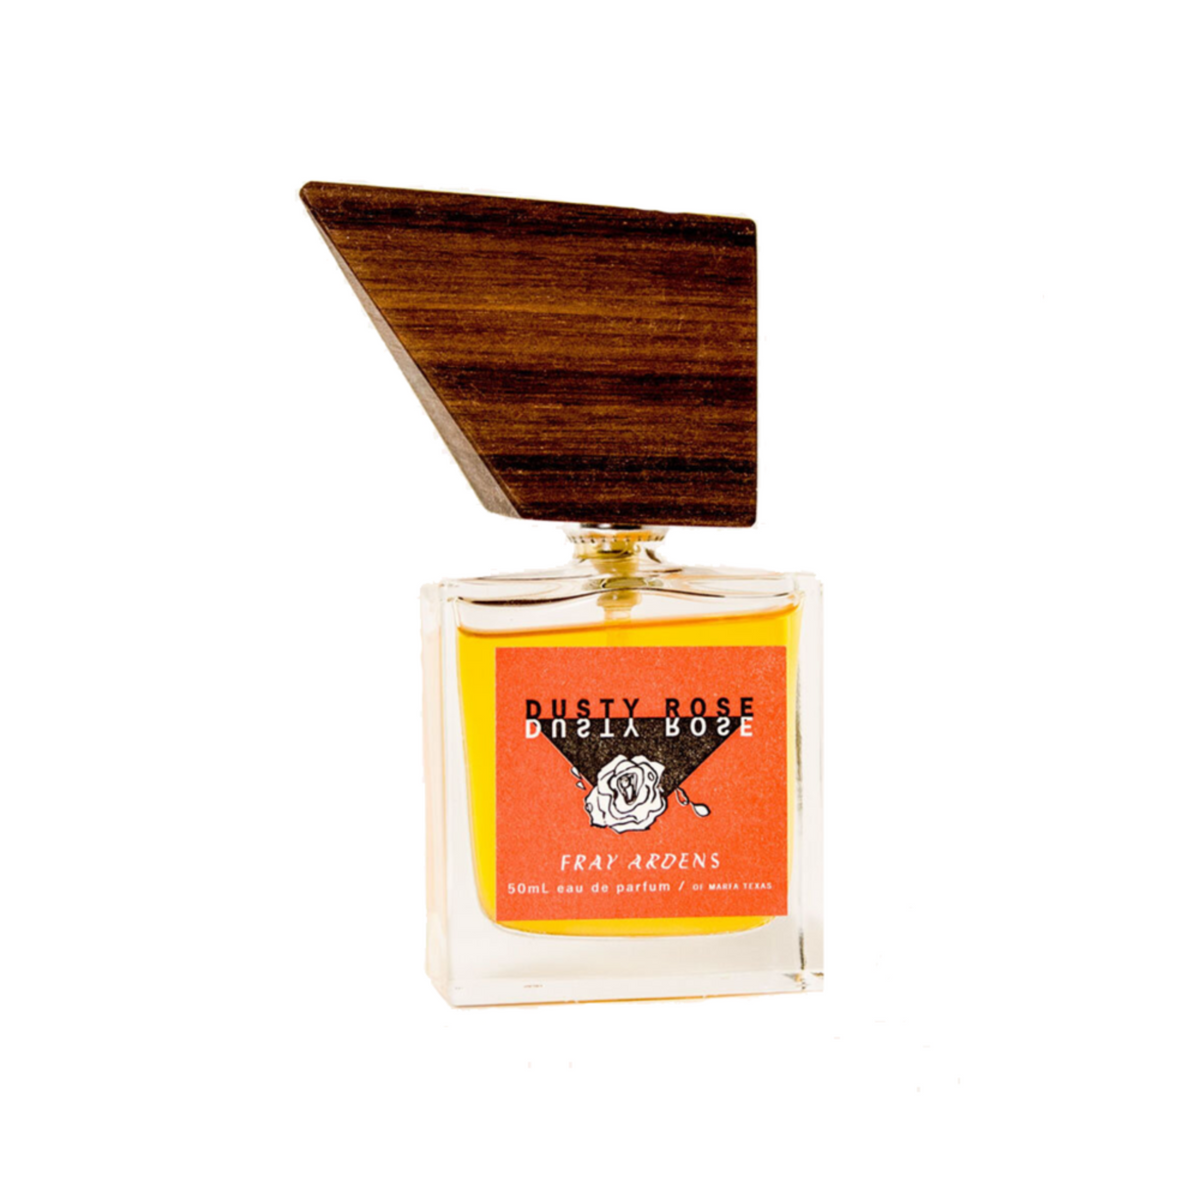 Primary Image of Fray Ardens Dusty Rose (50 ml)